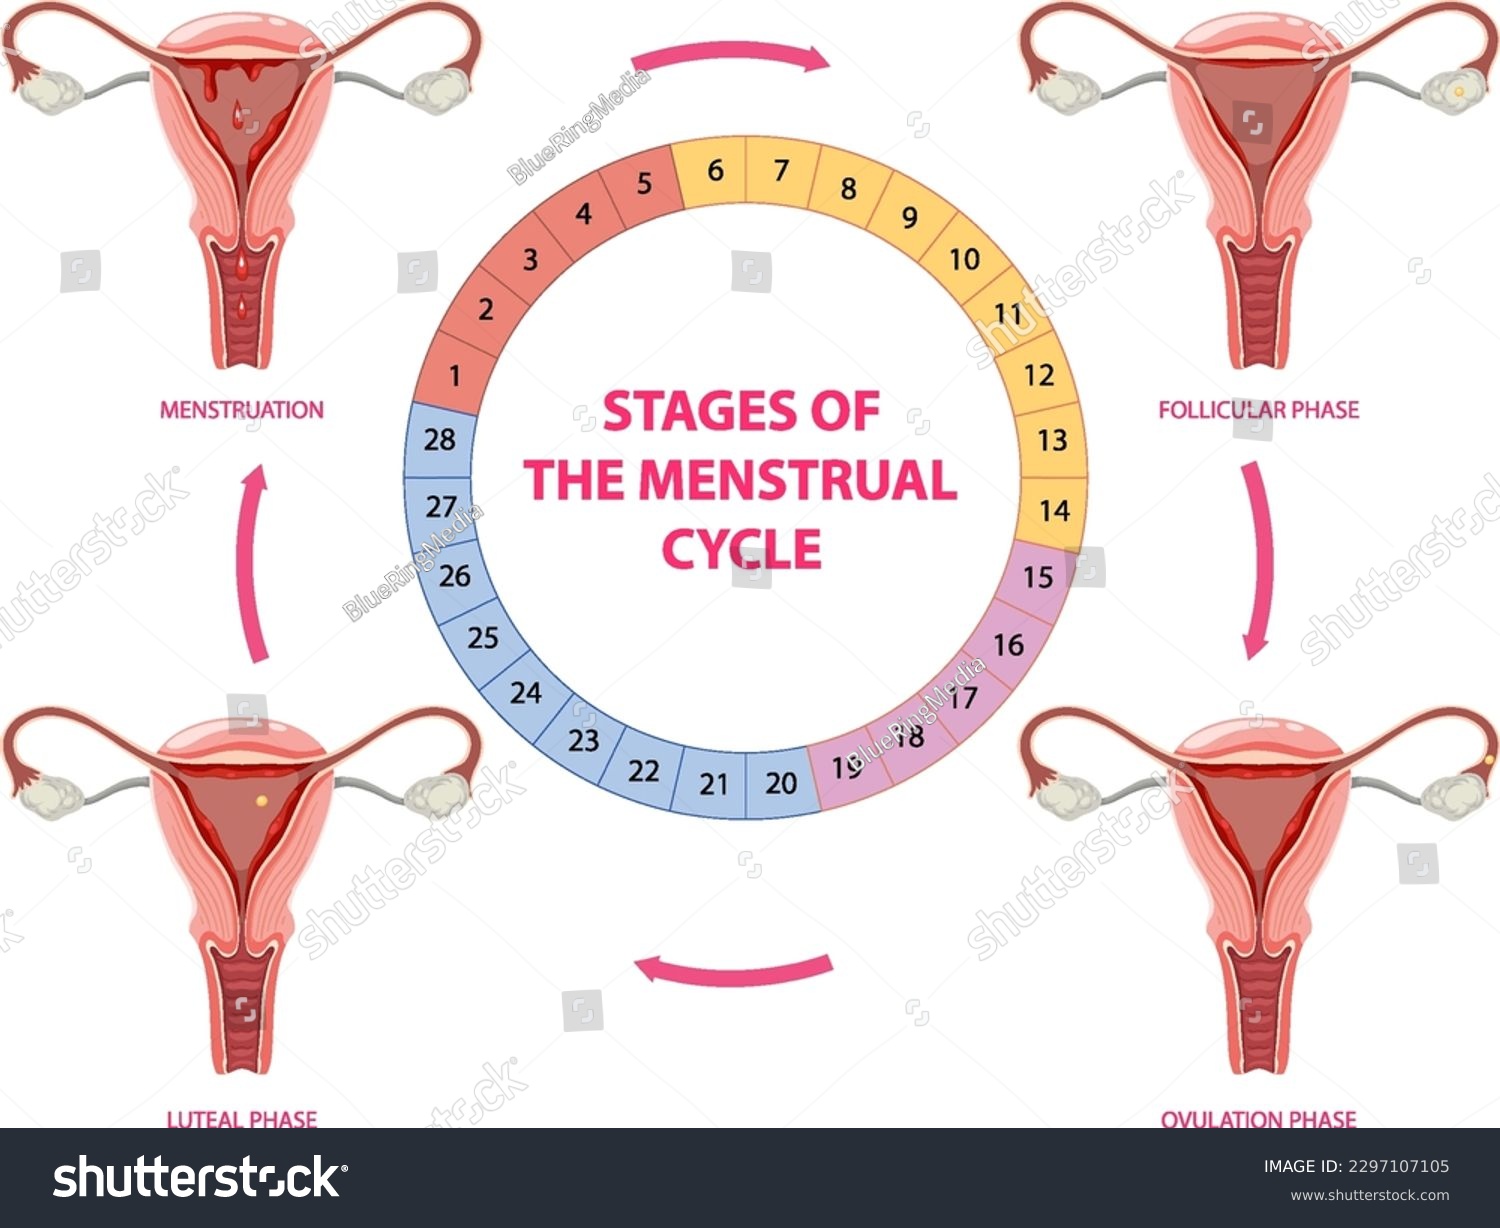 Stages Of The Menstrual Cycle Illustration Royalty Free Stock Vector 2297107105 5294